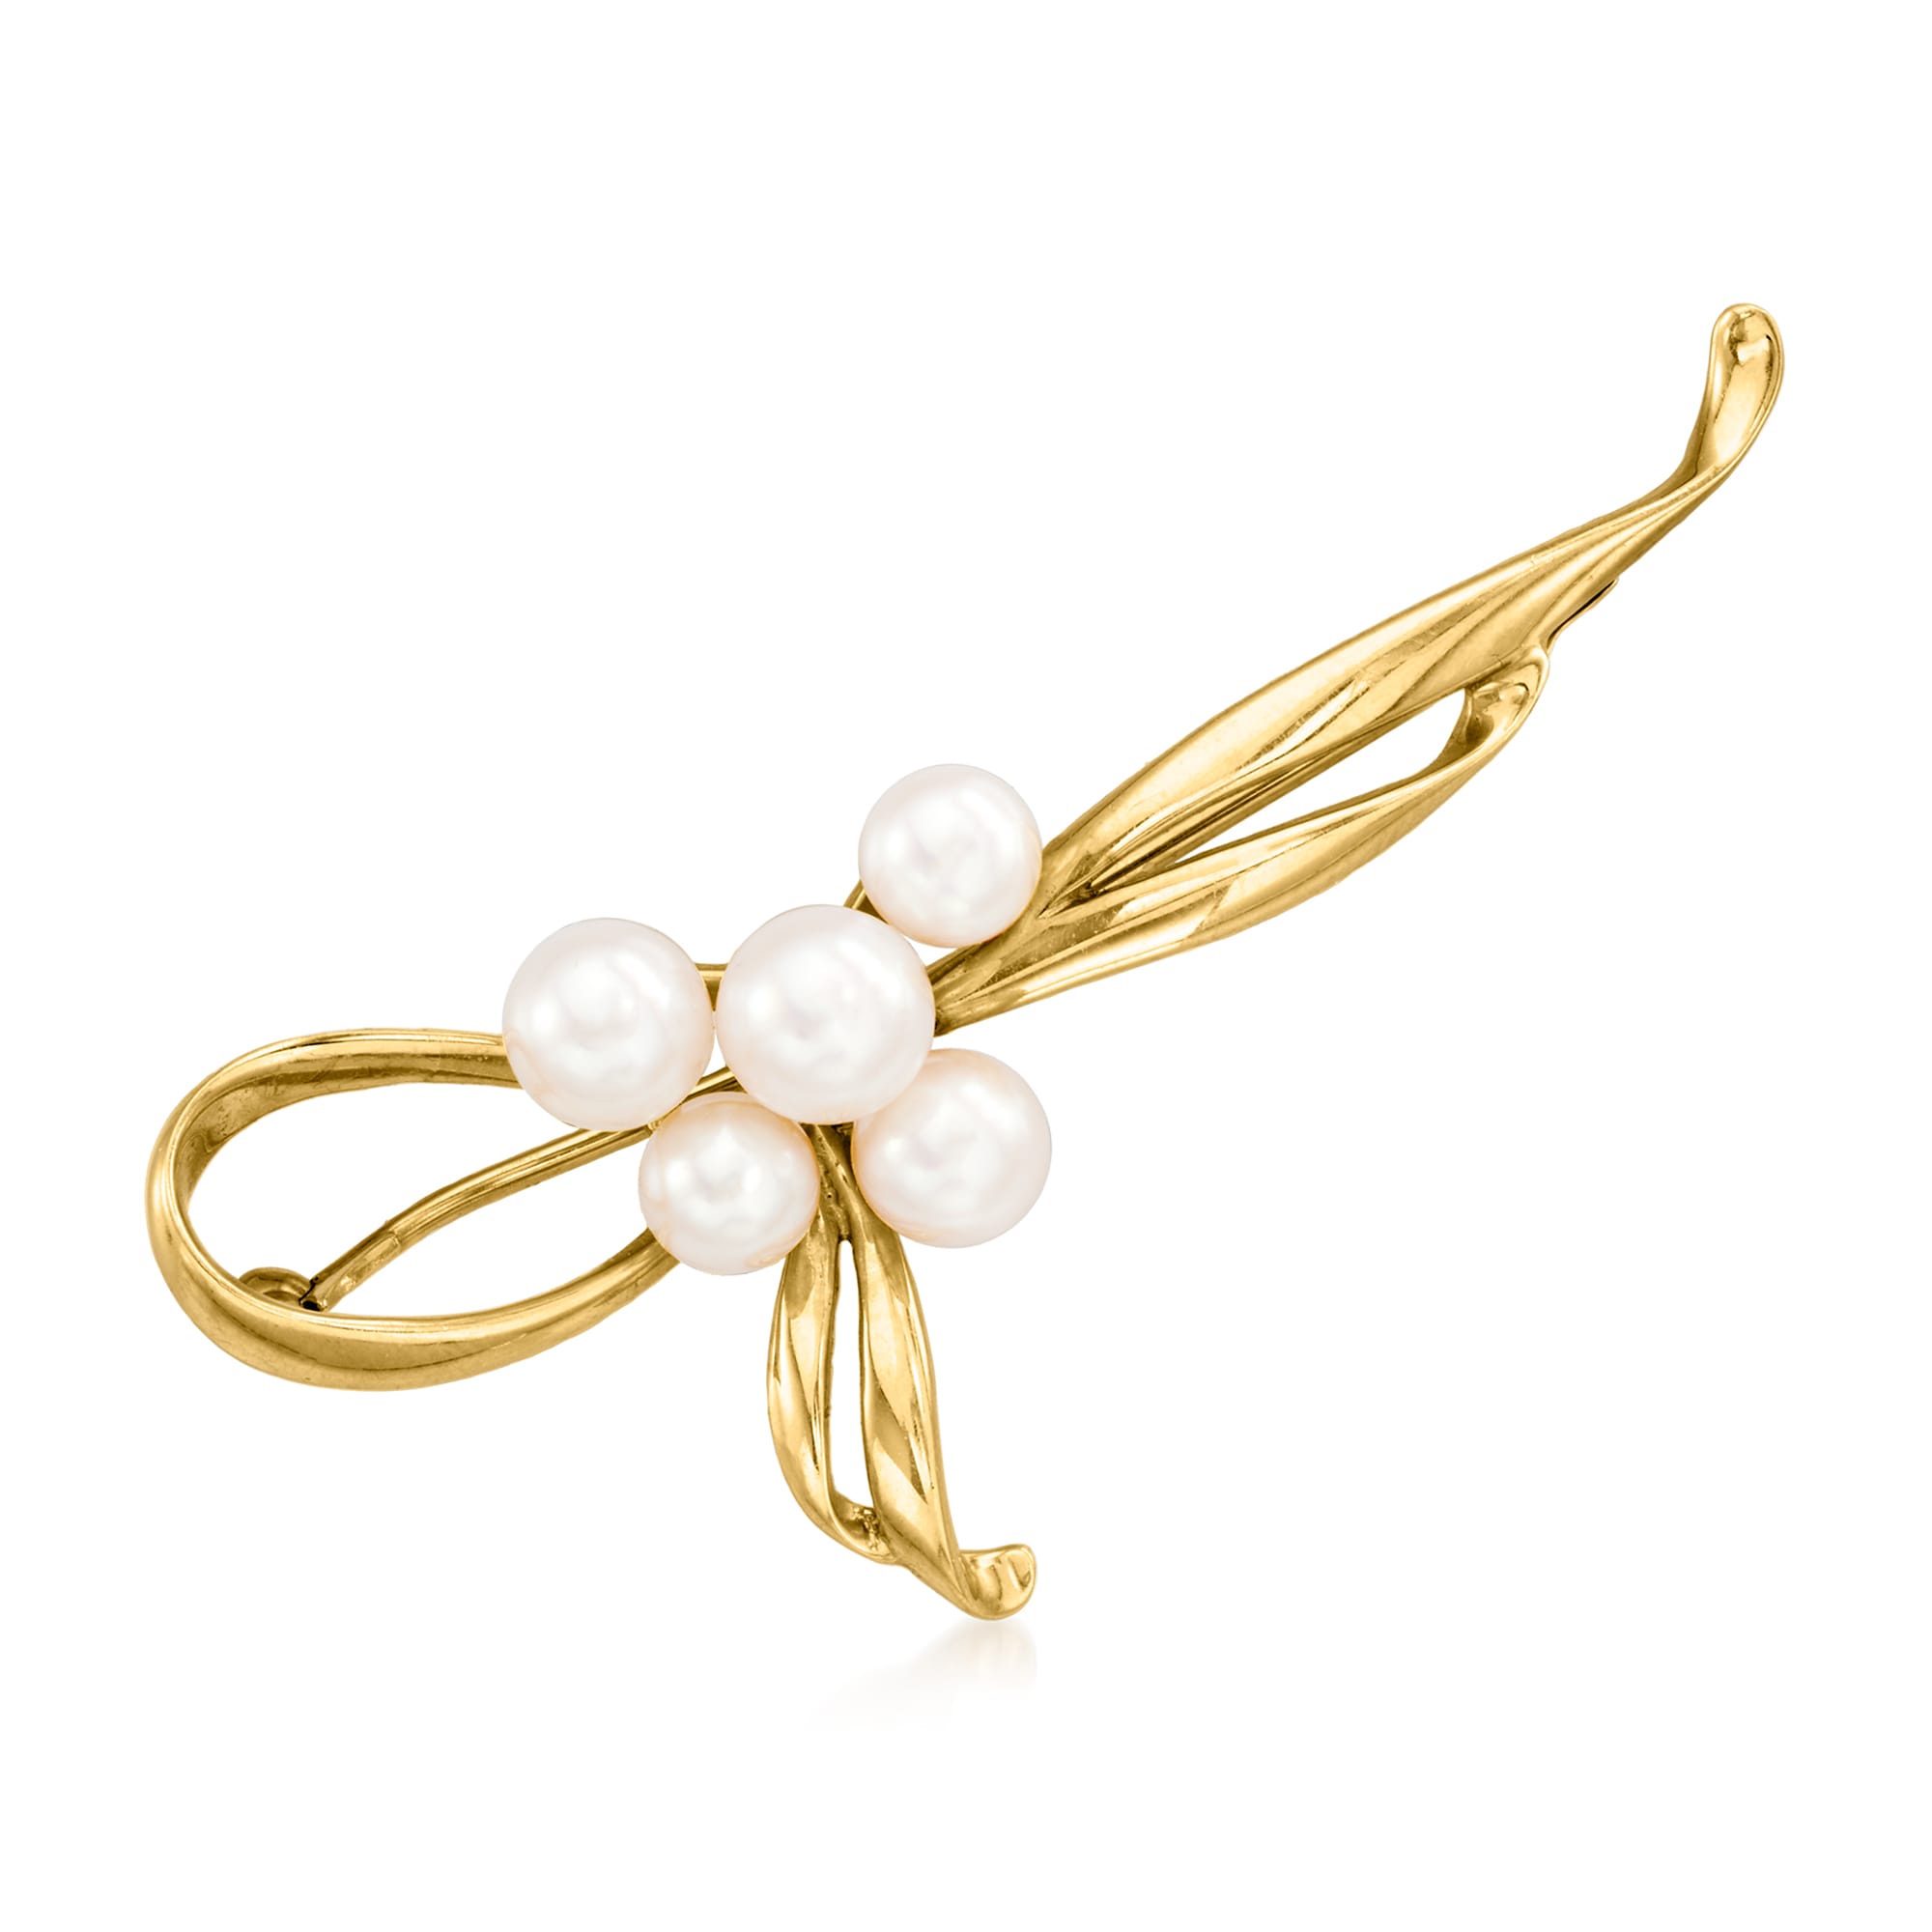 C. 1980 Vintage Mikimoto 5-6mm Cultured Pearl Bow Pin in 18kt Yellow ...